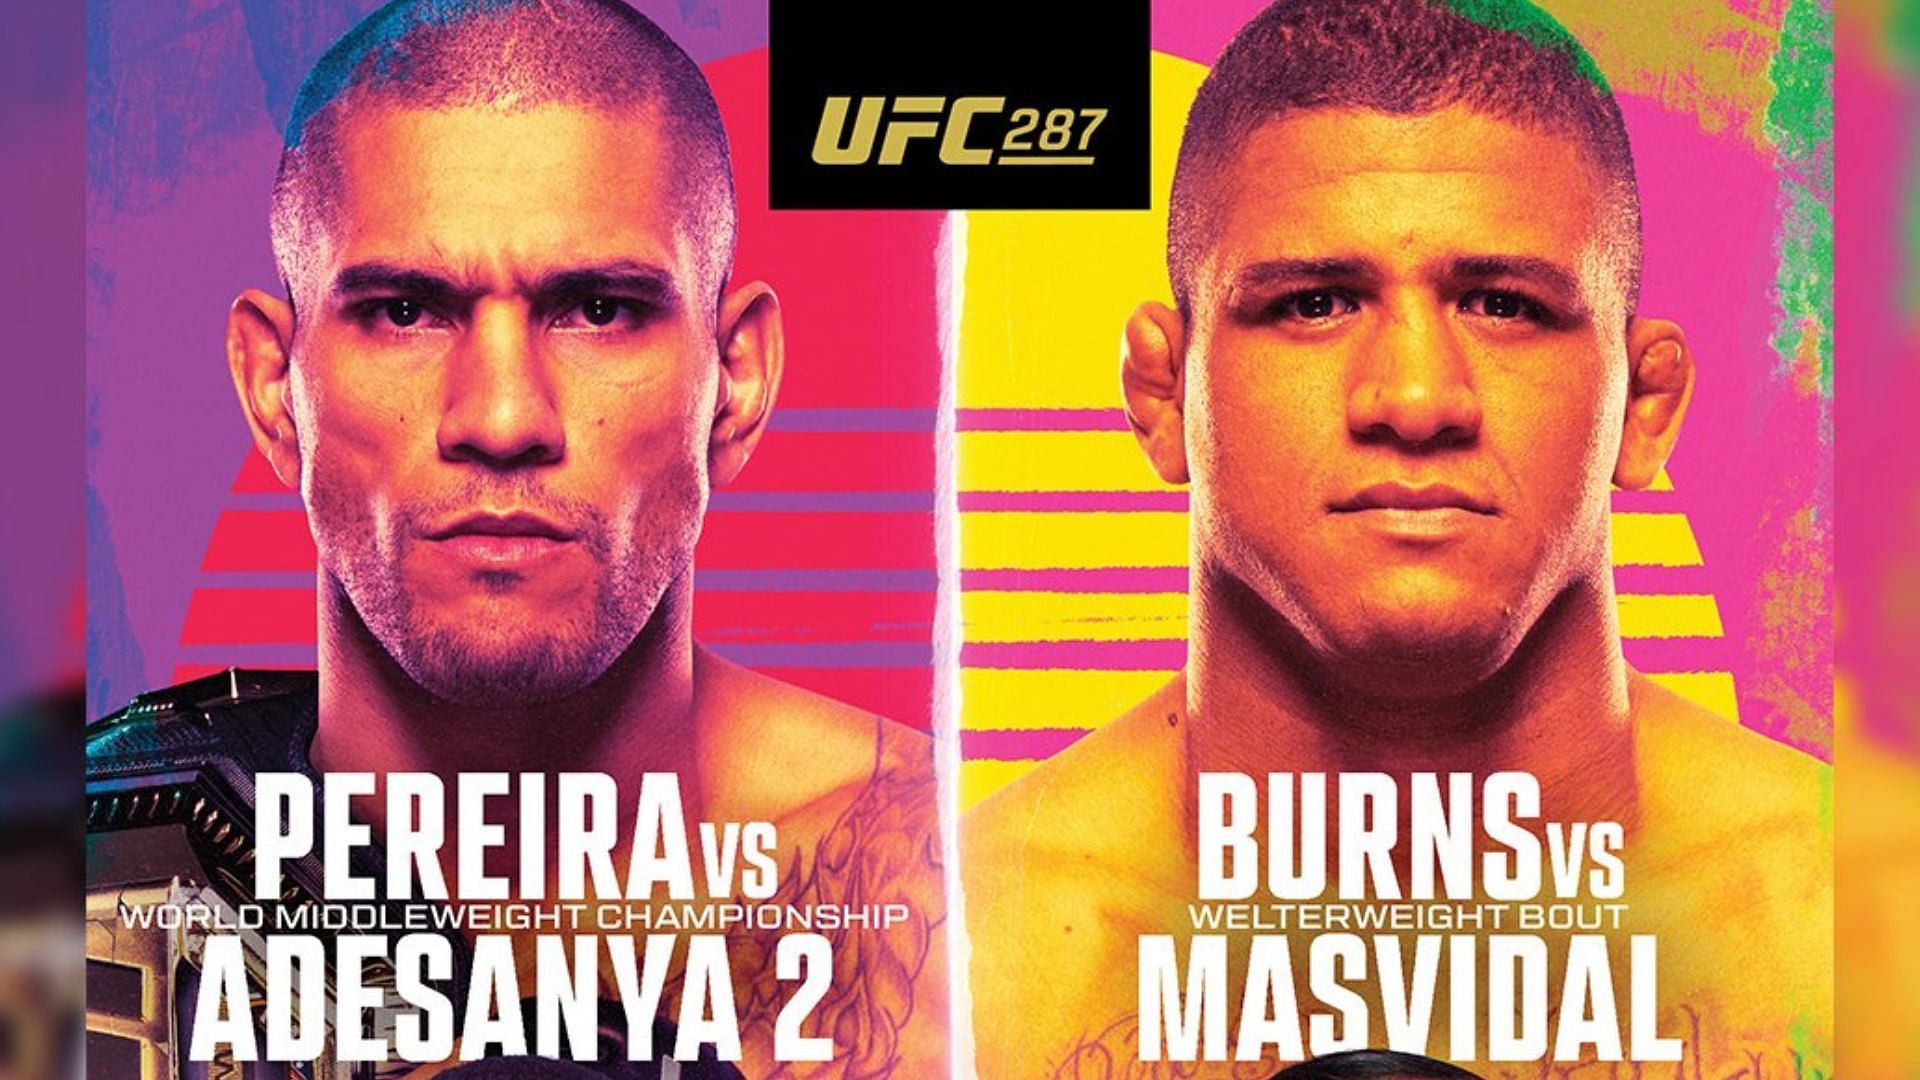 UFC 287 official poster [Image courtesy of @ufc on Twitter]